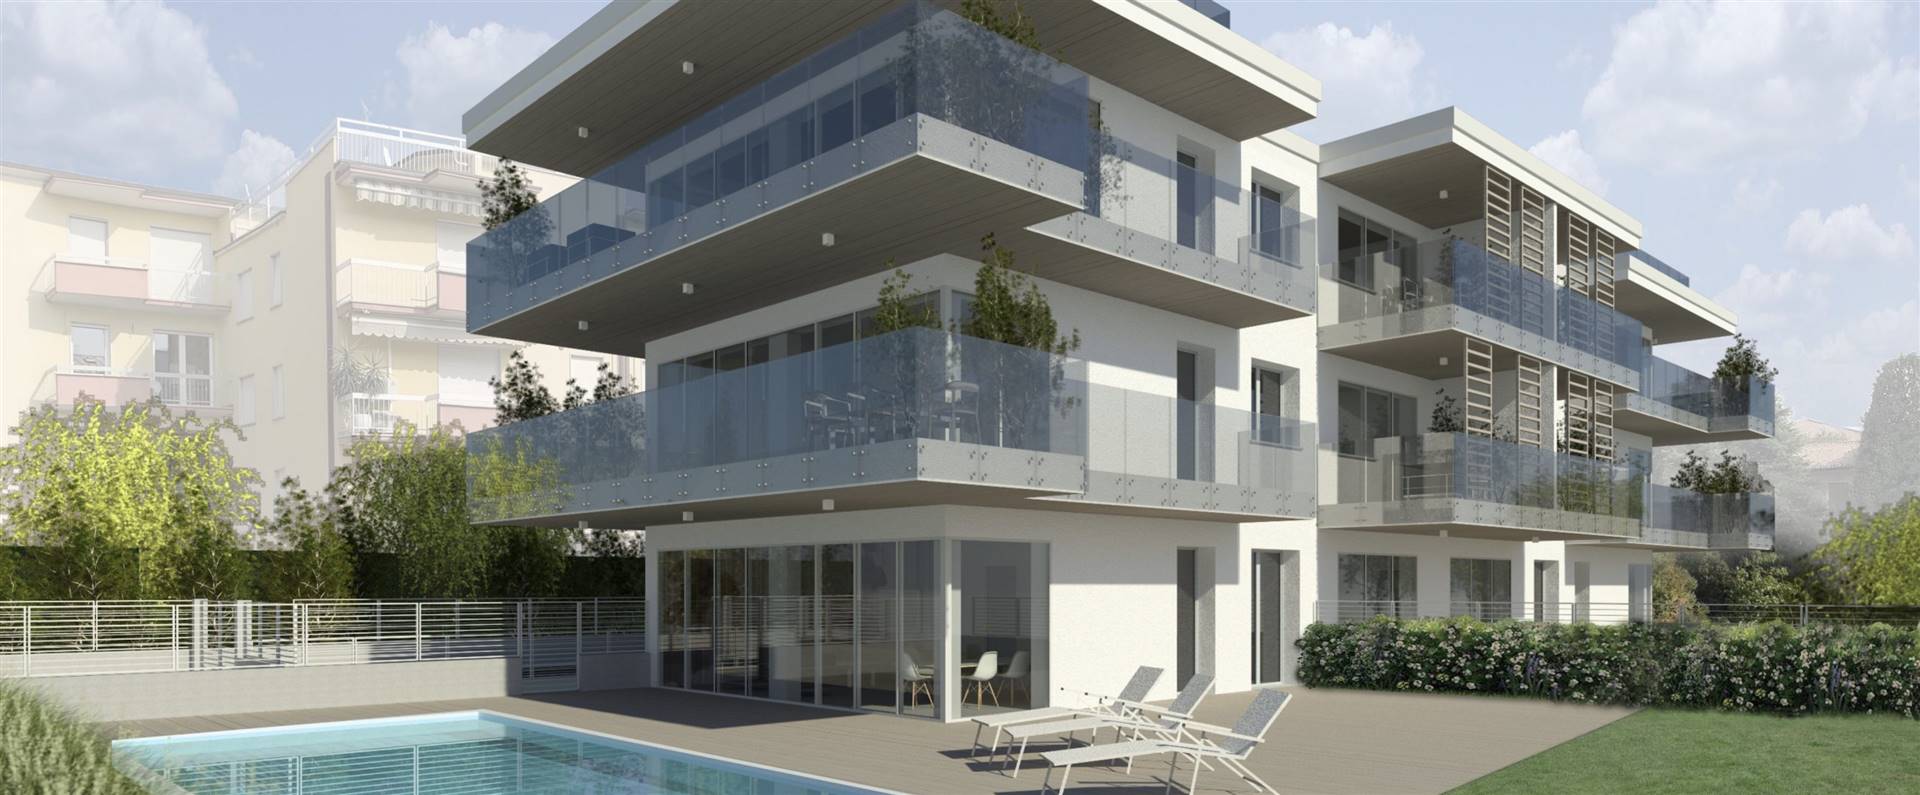 BARDOLINO, Apartment for sale of 130 Sq. mt., New construction, Heating To floor, placed at 1° on 3, composed by: 4 Rooms, Show cooking, , 3 Bedrooms, 2 Bathrooms, Elevator, Swimming pool, Price: € 